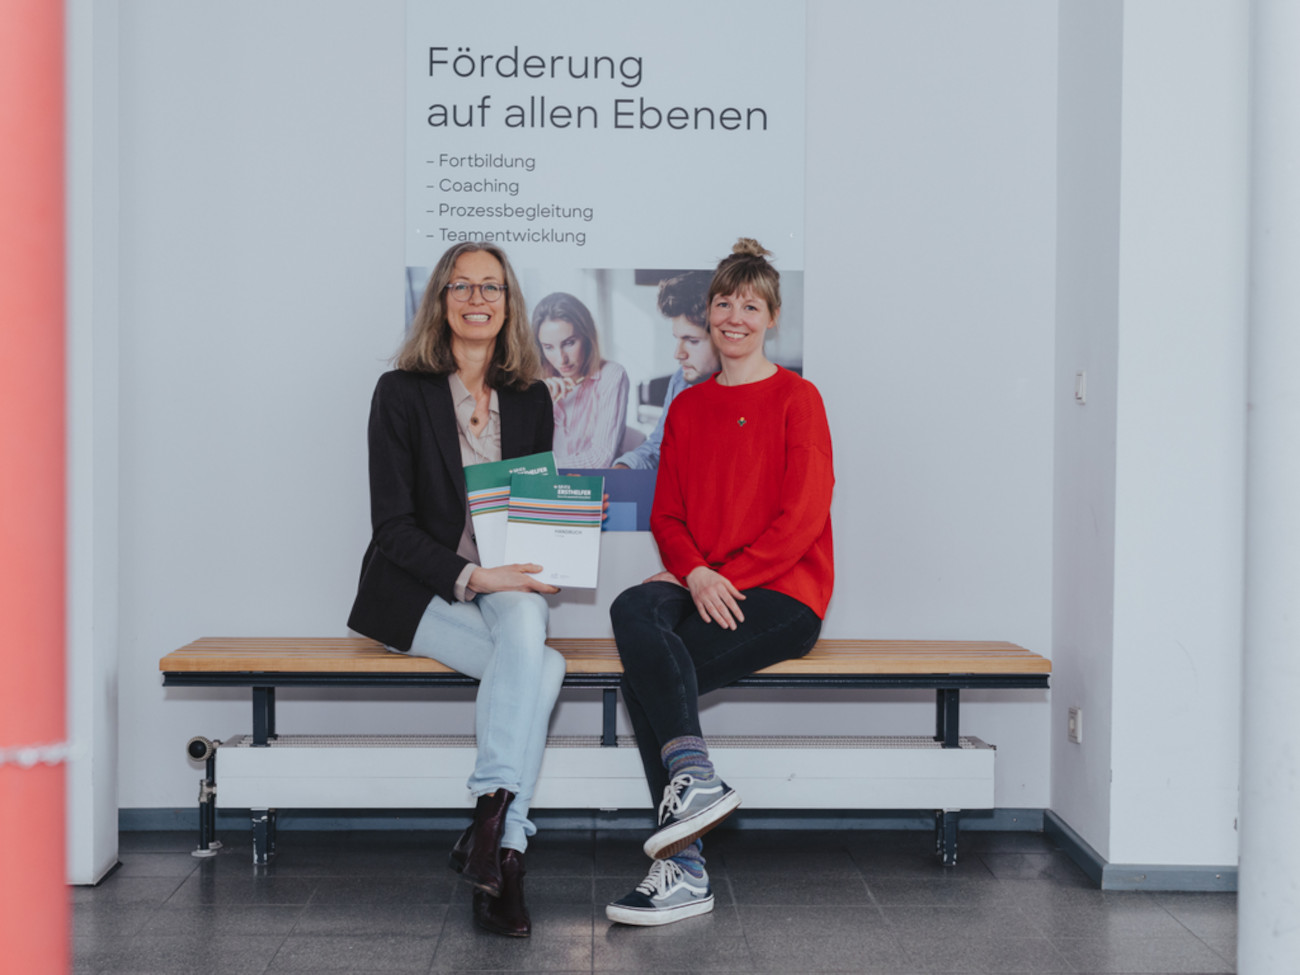 Simone Oelze and Alexandra Baumkötter are sitting on a bench. They are holding MHFA catalogs in their hands.